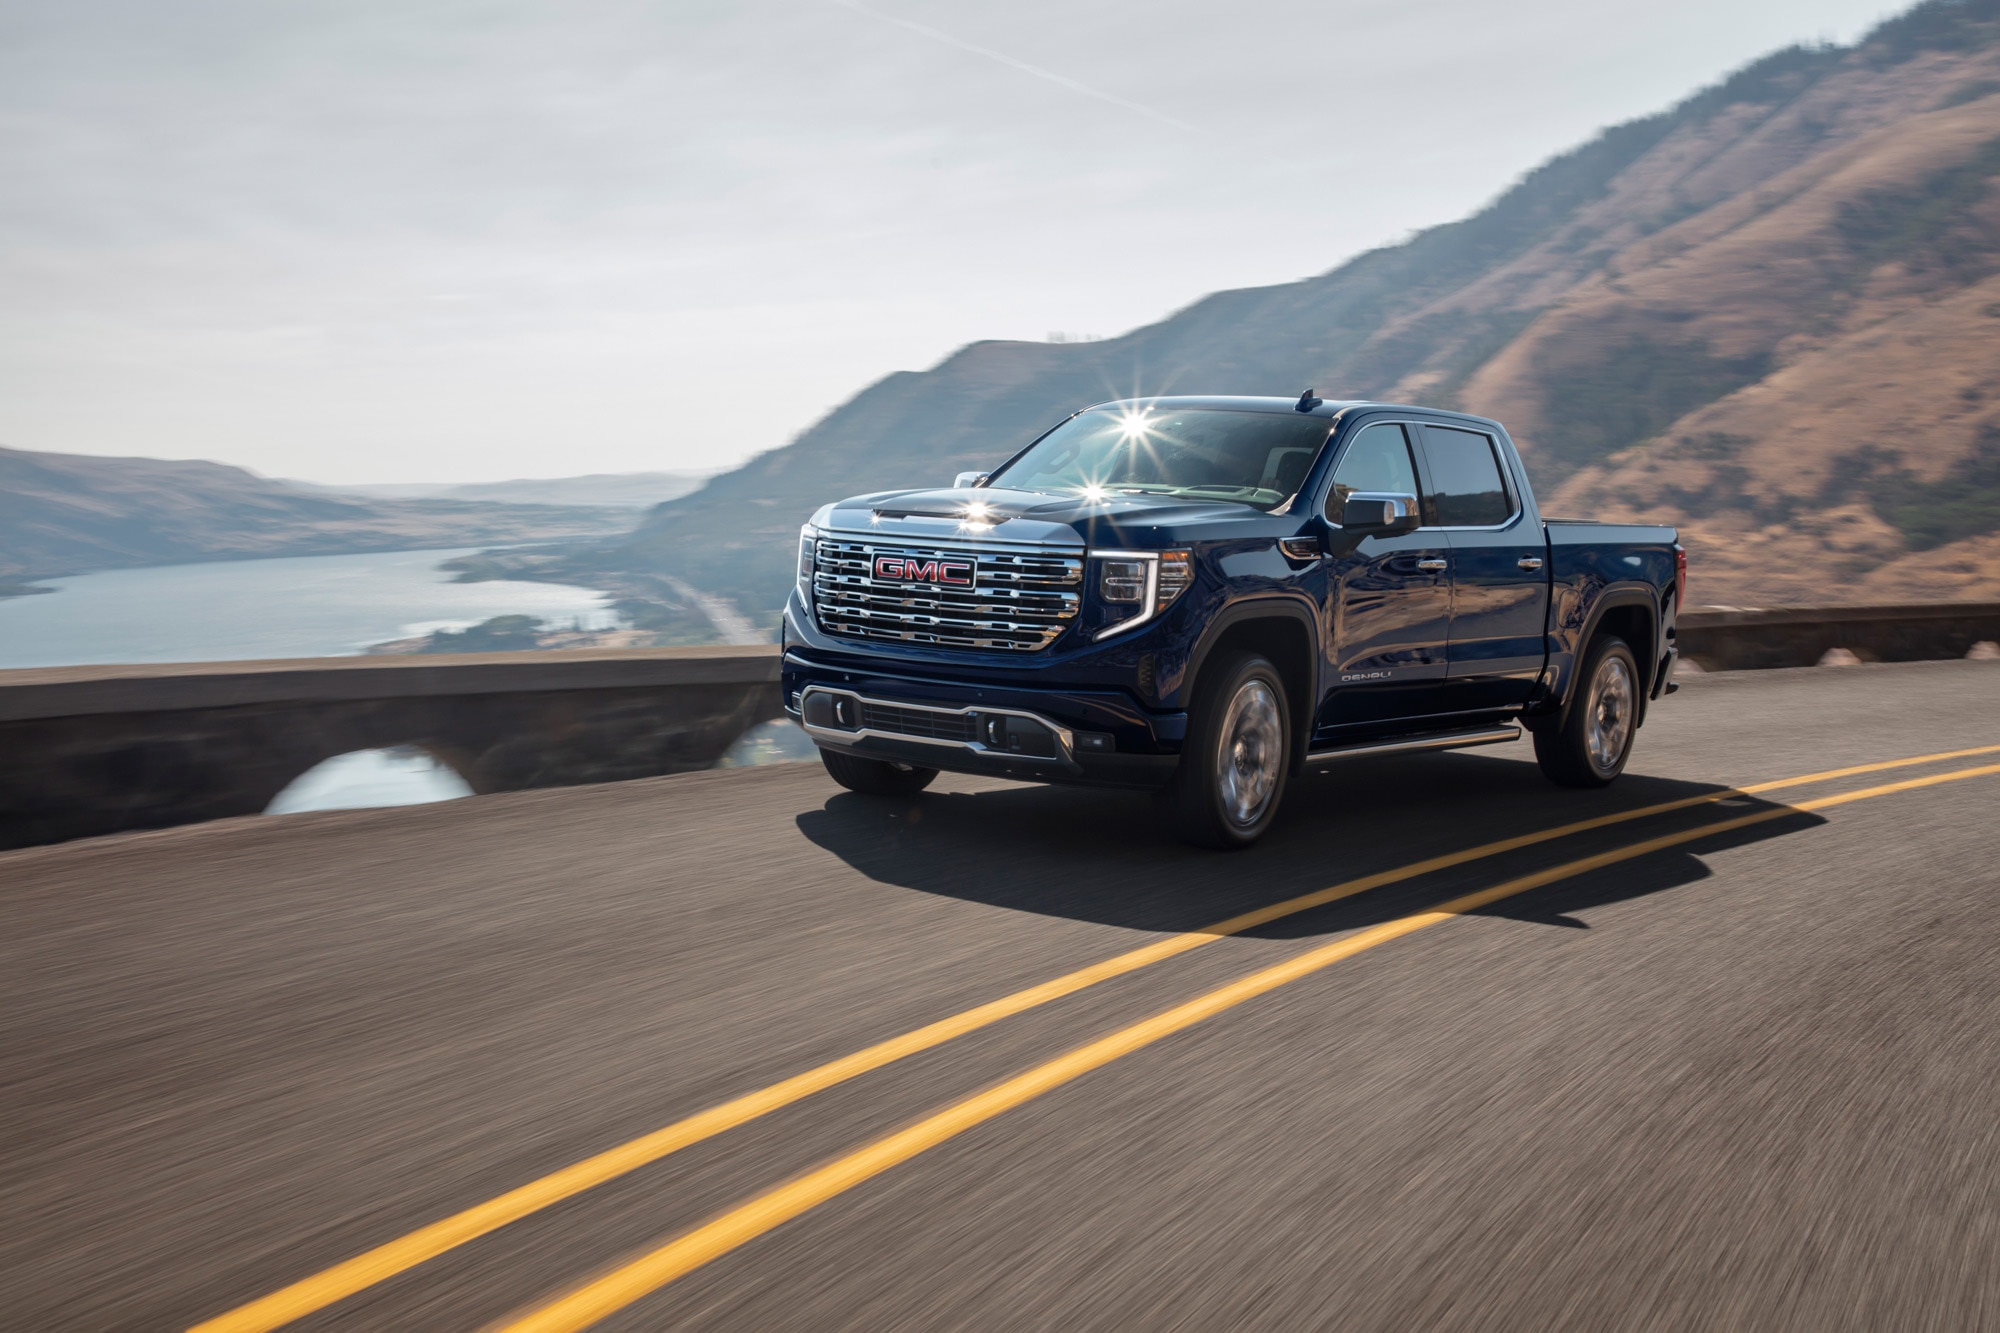 Blue 2023 GMC Sierra 1500 drives along a scenic road overlooking hills and water.